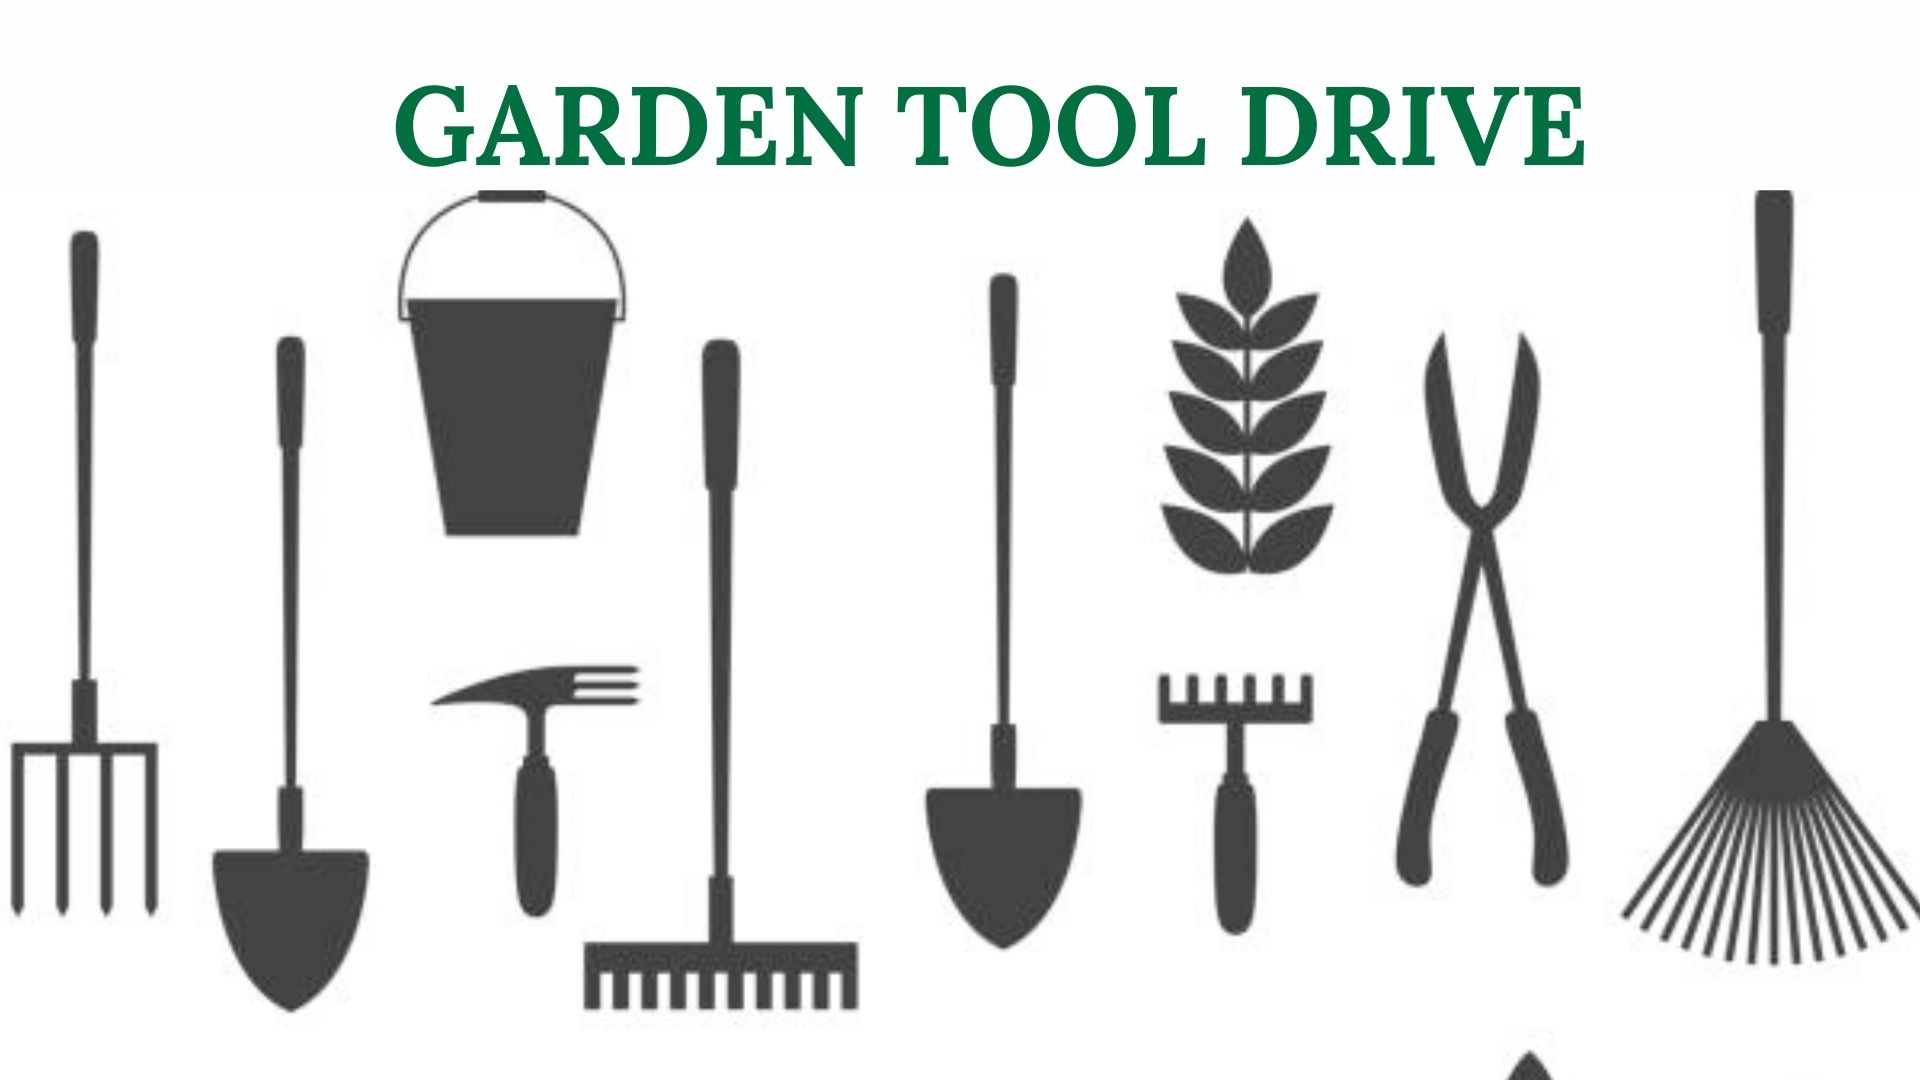 Garden Tool Drive, picture of tools